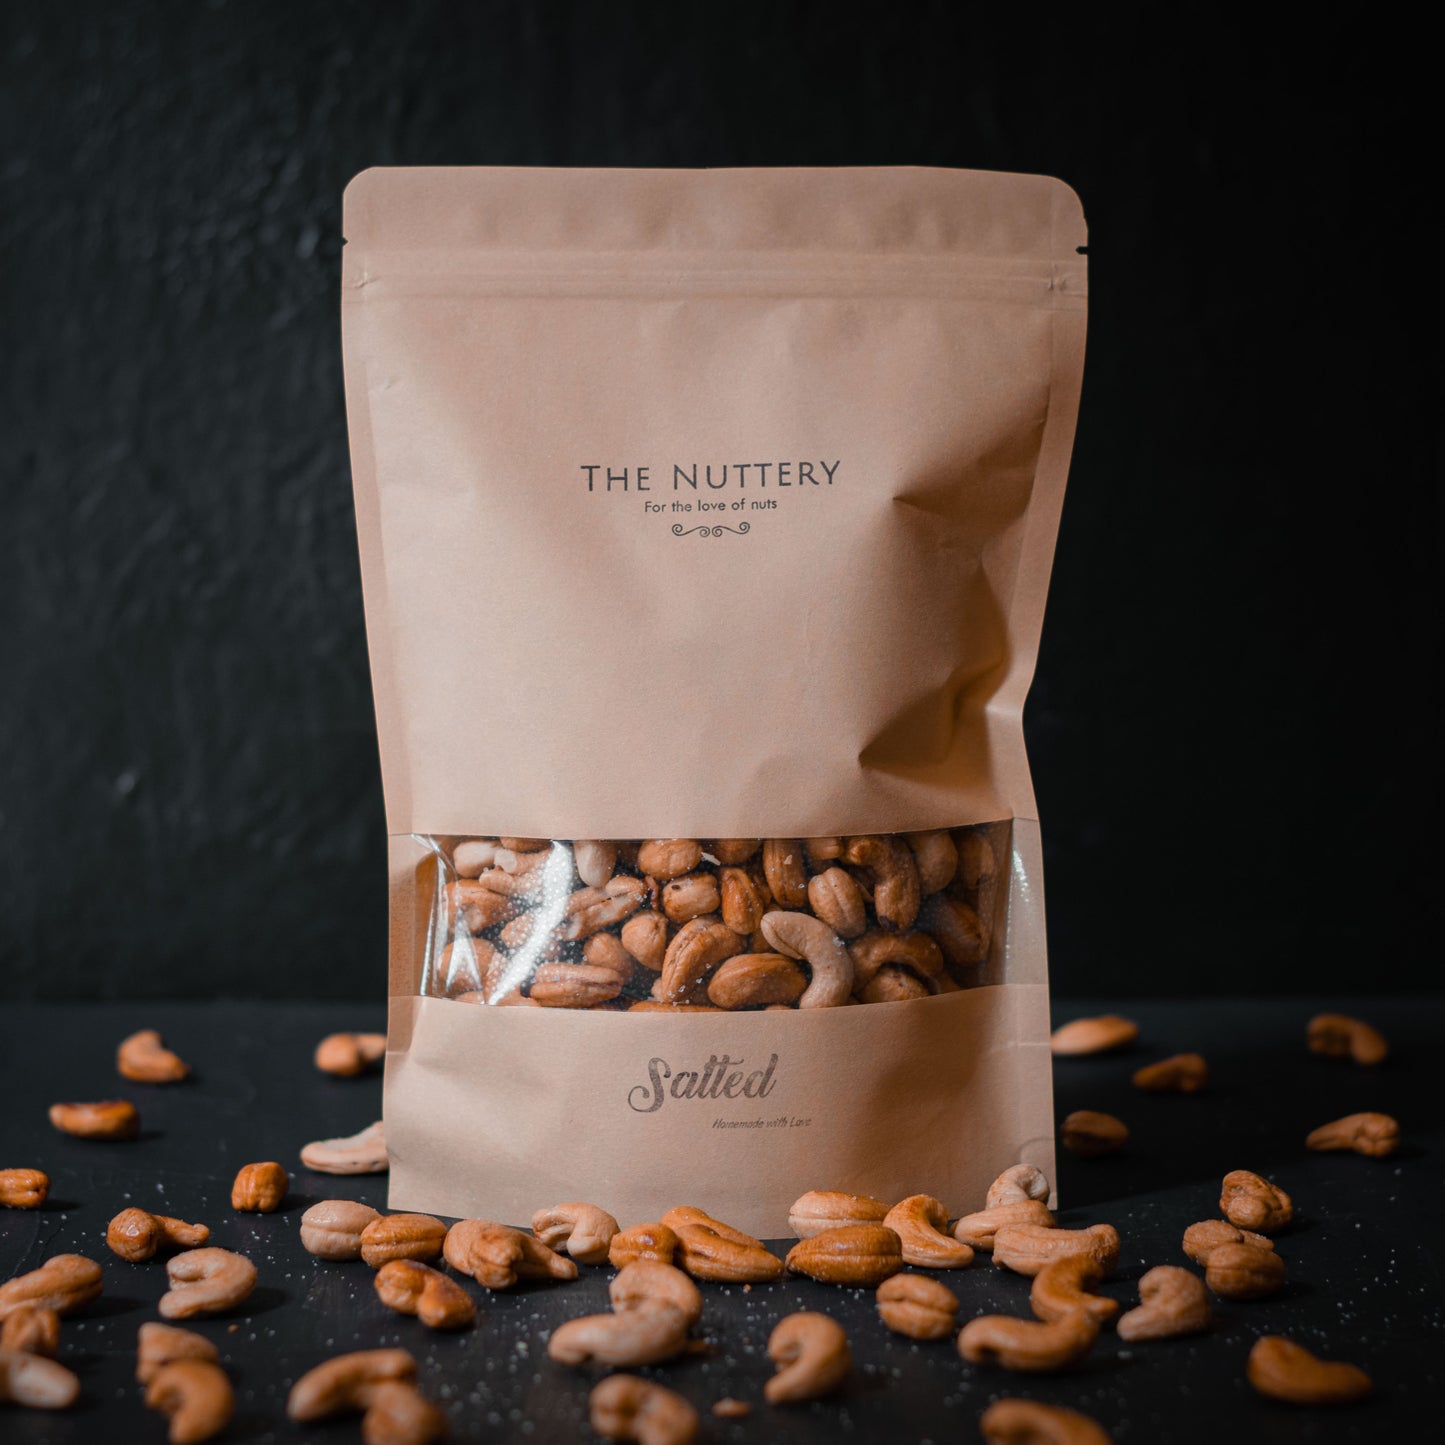 Salted Cashews - The Nuttery